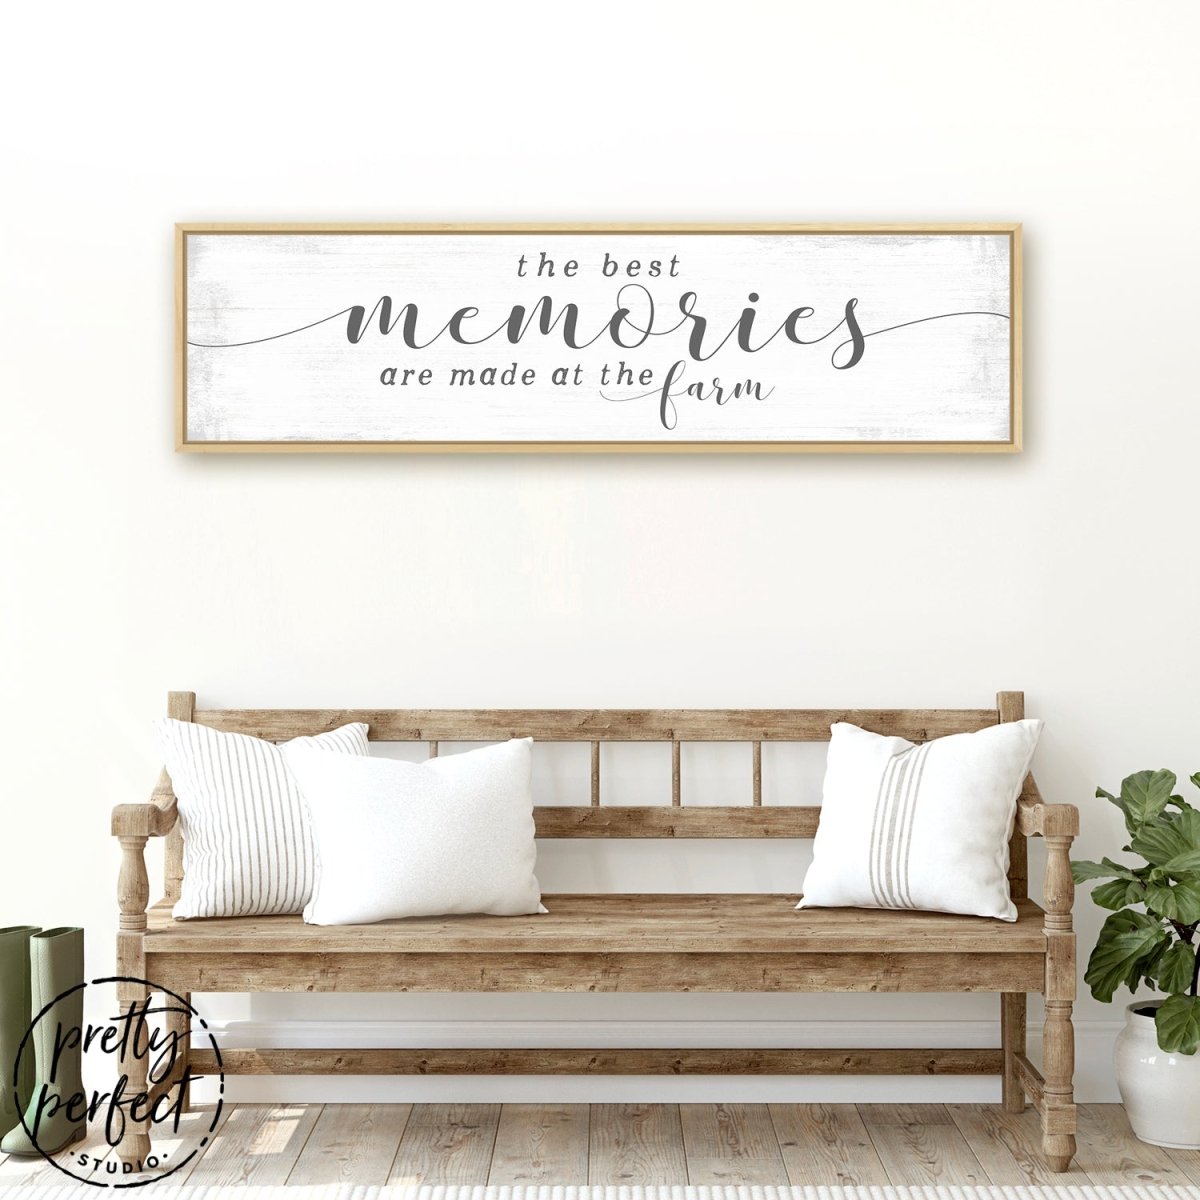 The Best Memories Are Made at the Farm Sign Above Entryway Bench - Pretty Perfect Studio